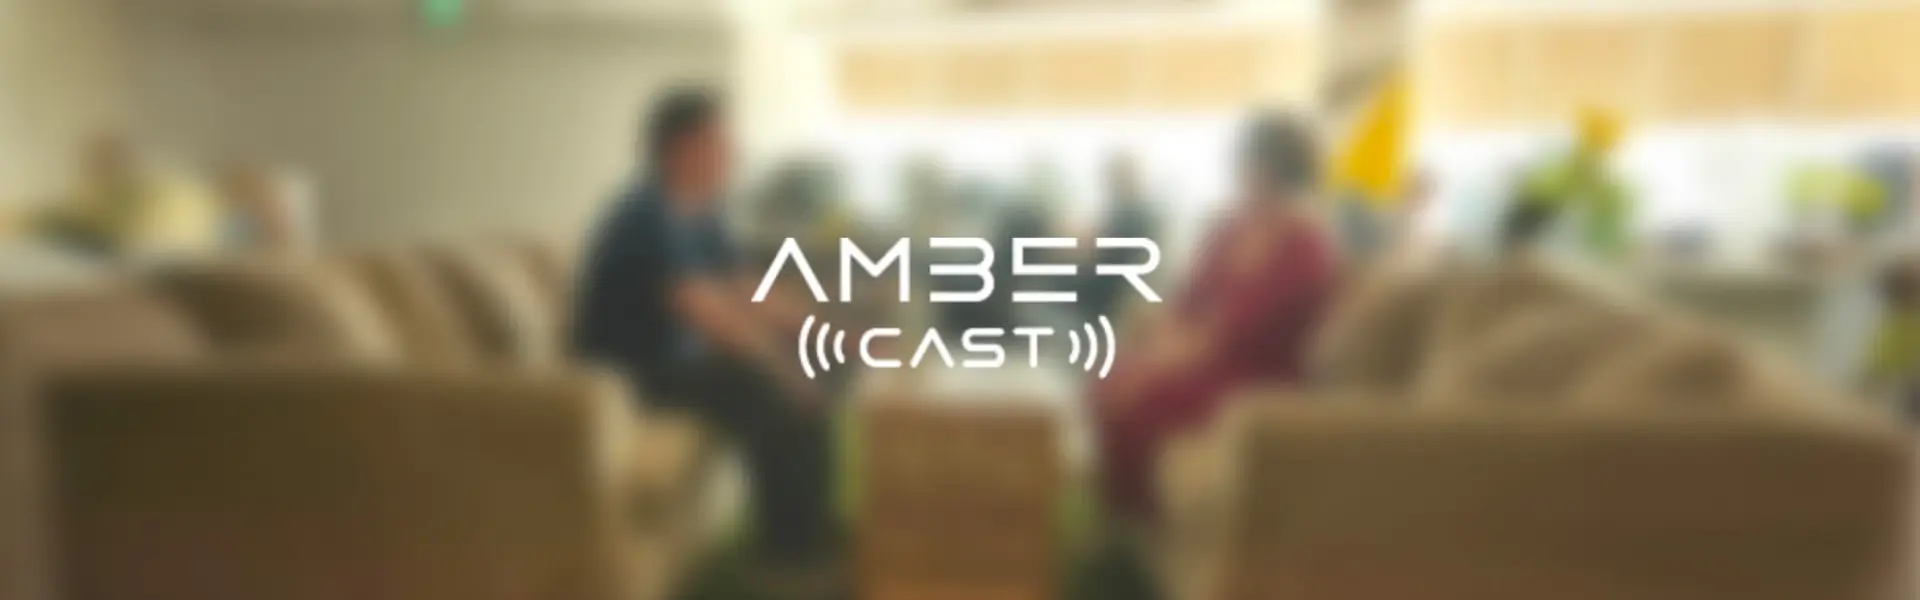 About eGaming & Being an eSports Athlete - AmberCast with Octav 'ang' Cretu